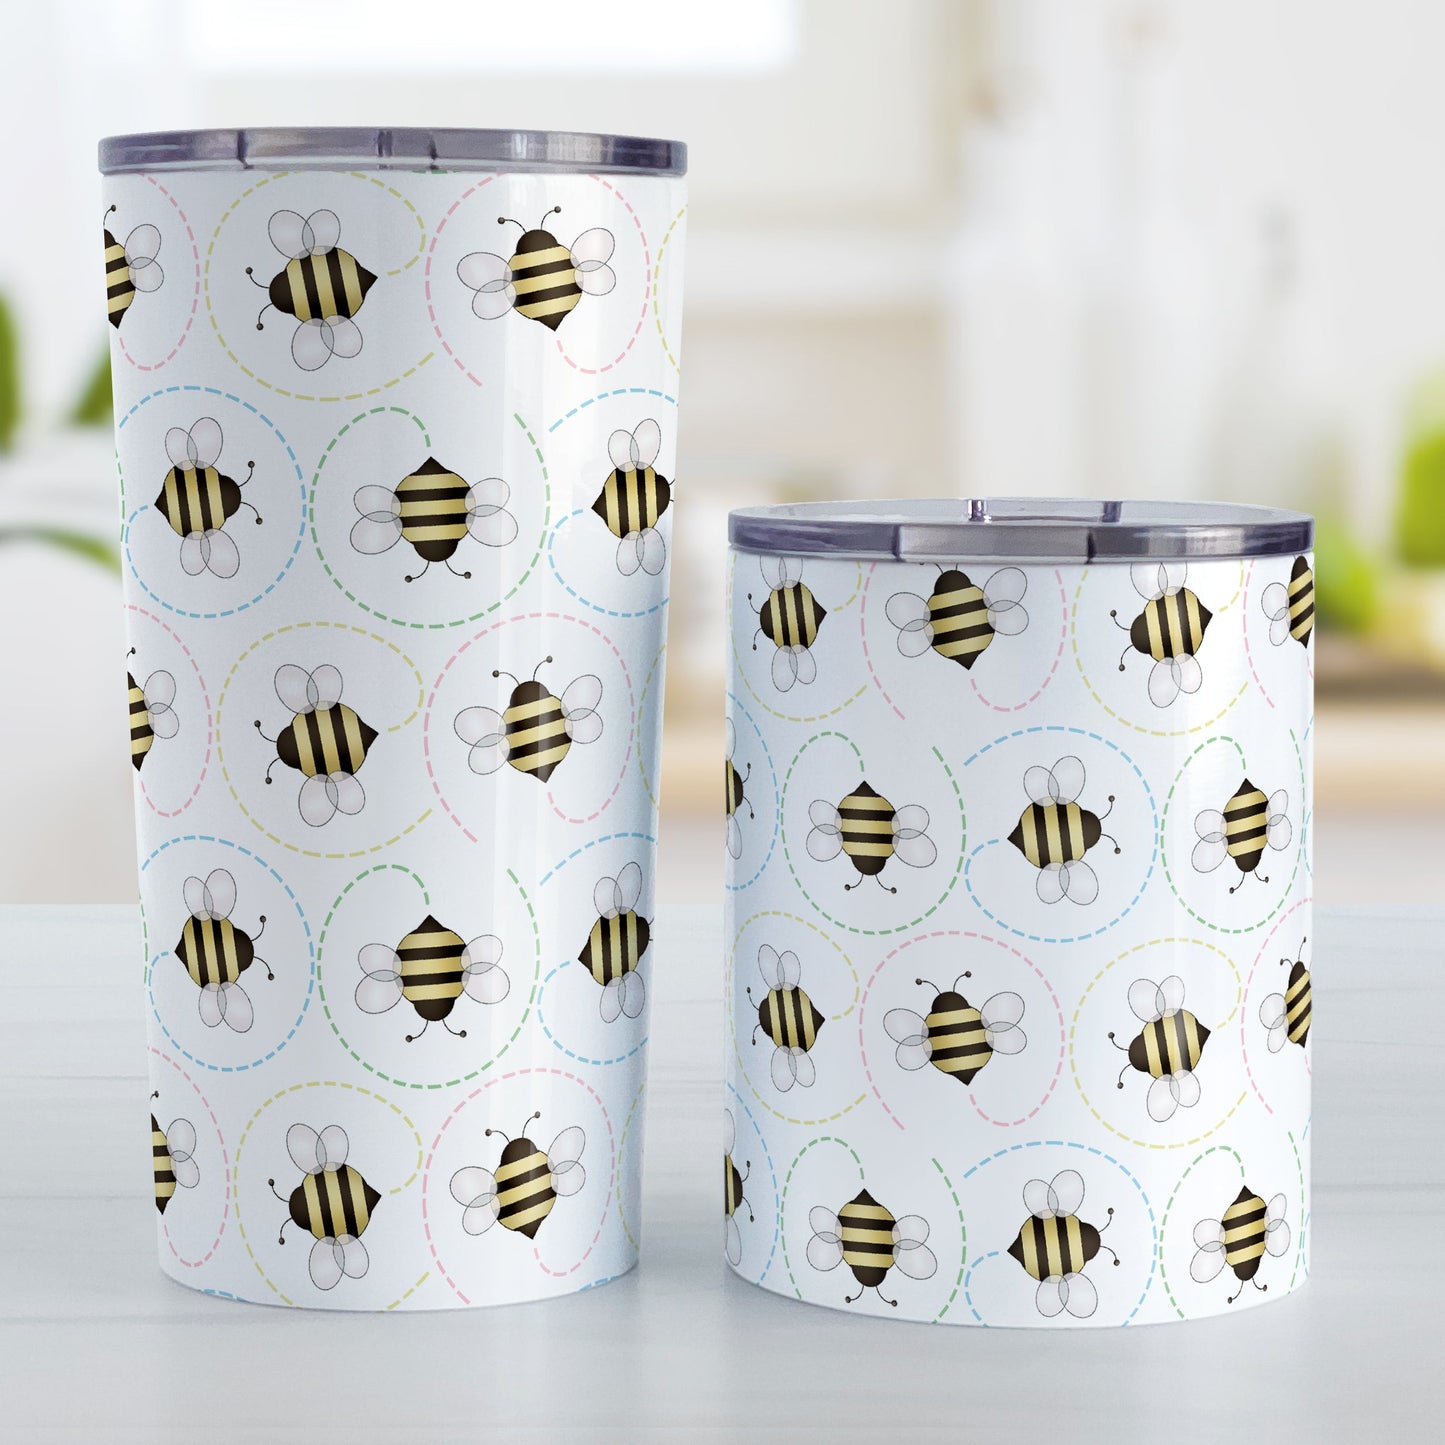 Circling Dainty Bee Pattern Tumbler Cup (20oz and 10oz, stainless steel insulated) at Amy's Coffee Mugs. Bee tumbler cups with adorable dainty black and yellow bees in a pattern around the cups with colorful dotted line circling flight paths. A minimalist bee design for bee lovers who also love color and happy designs. The different sized cups are displayed next to each other.